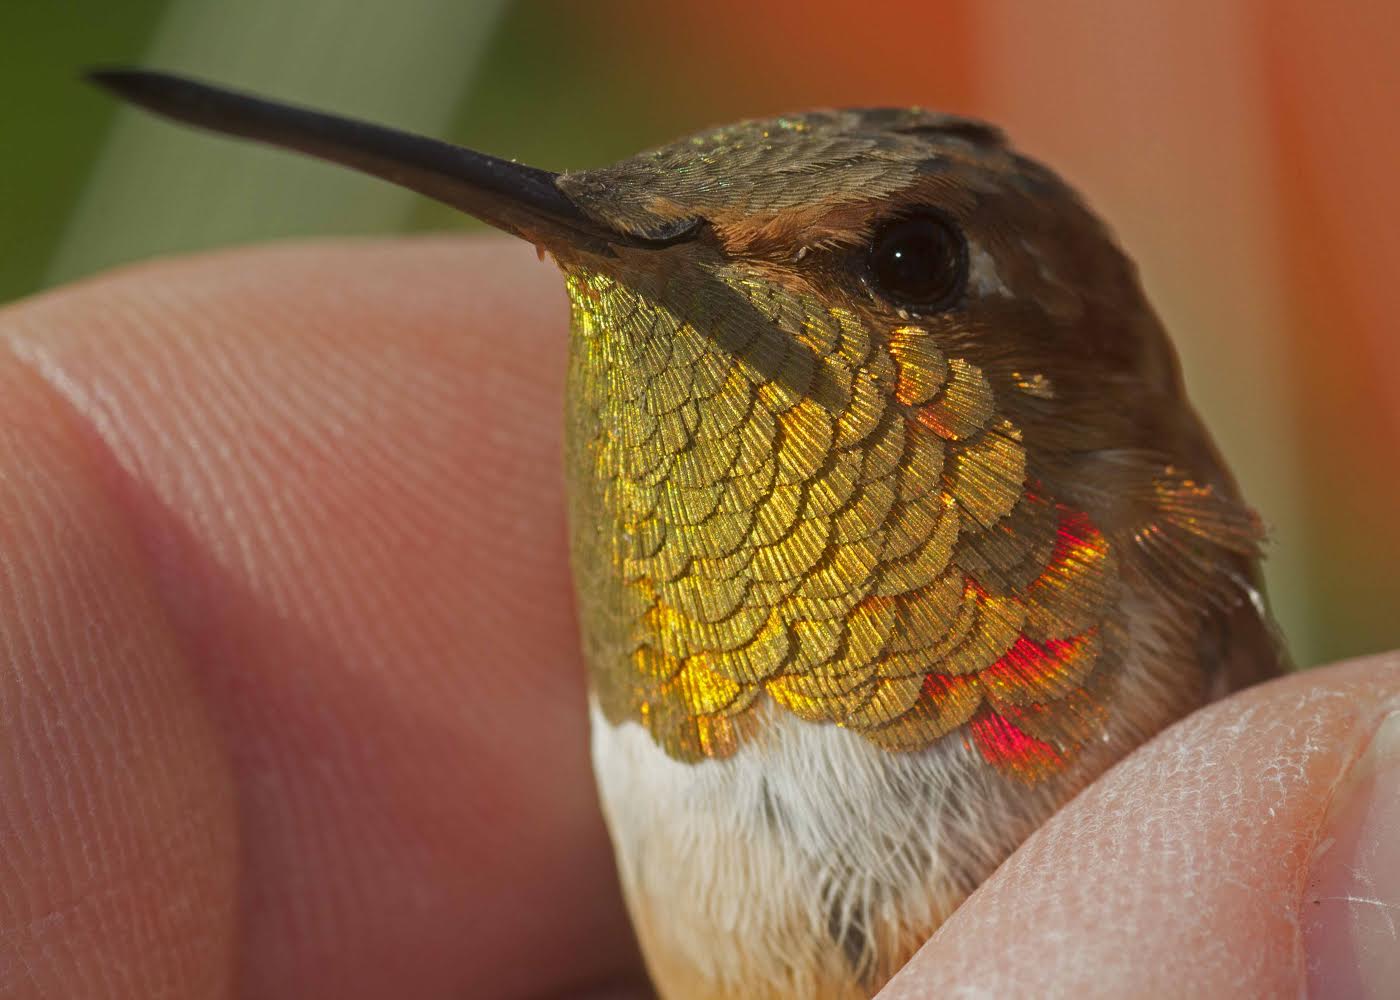 When the sun catches the iridescent gorget of a male rufous hummingbird, it glows with red-orange brilliance. (Credit: Scott Weidensaul)